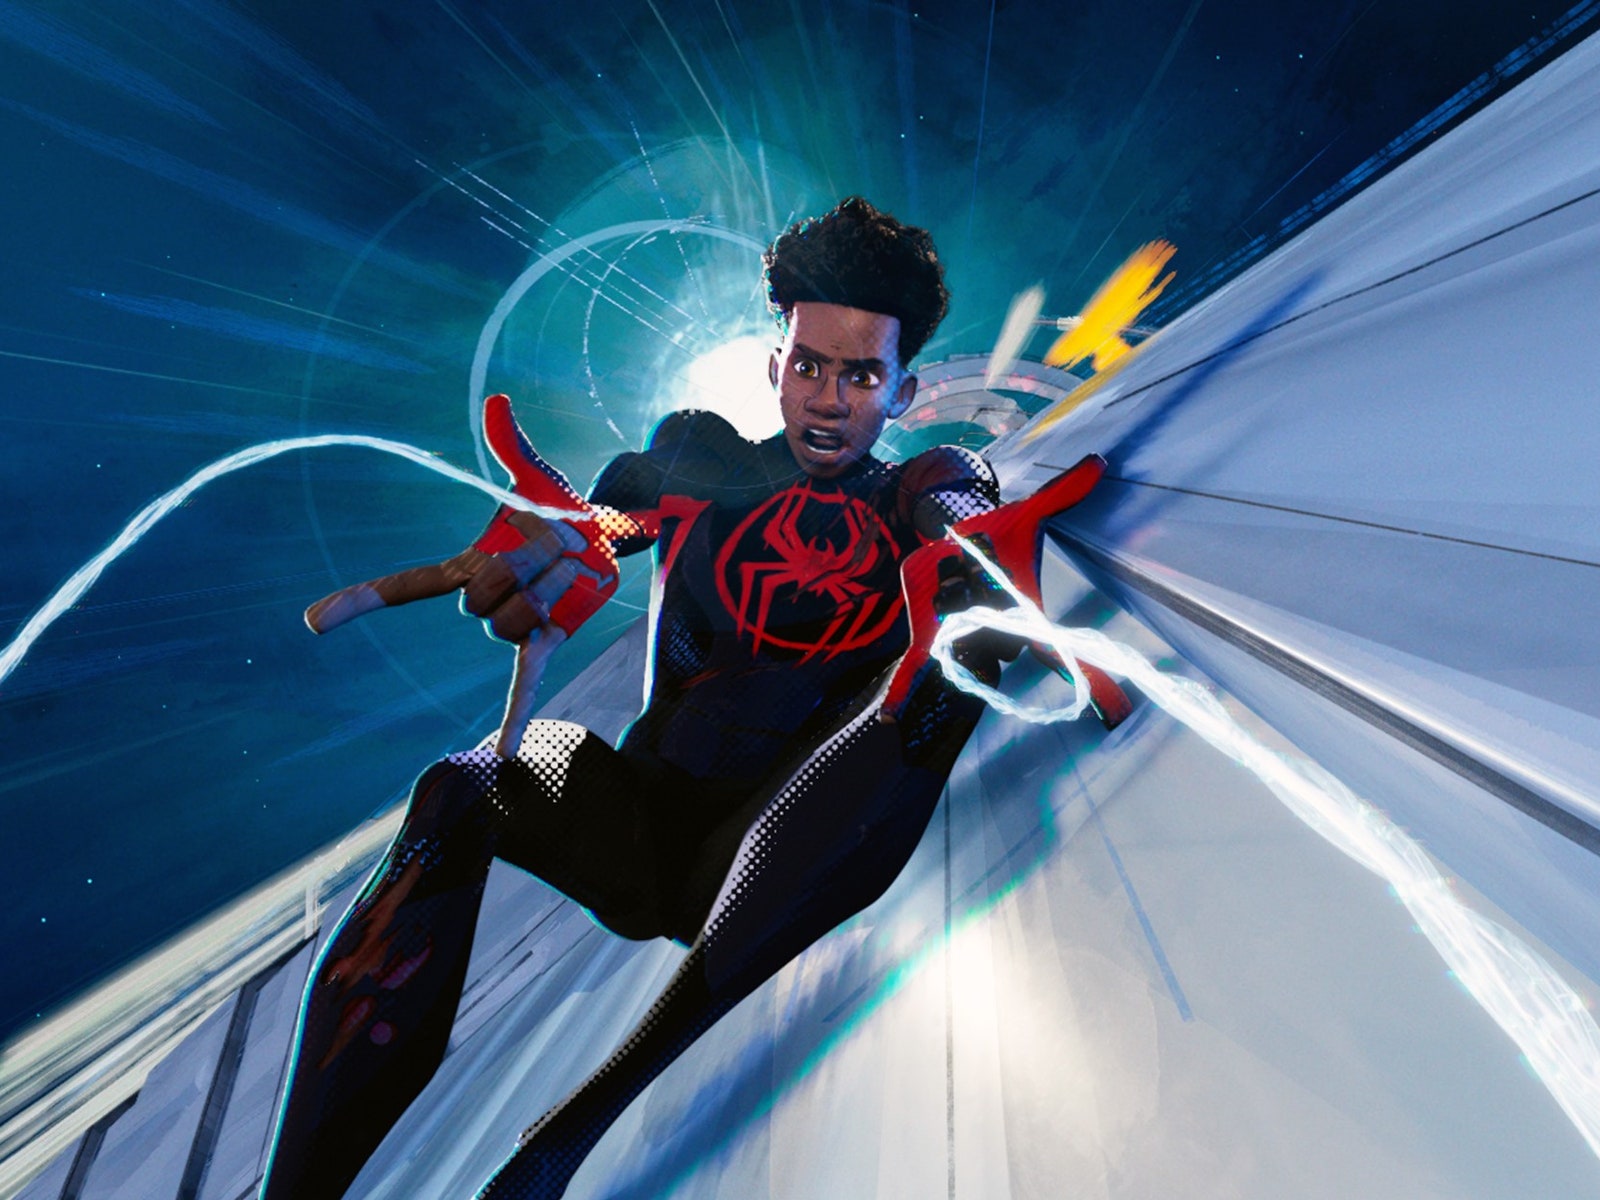 One of Across the Spider-Verse’s Most Memorable Scenes Was Animated By a 14-Year-Old